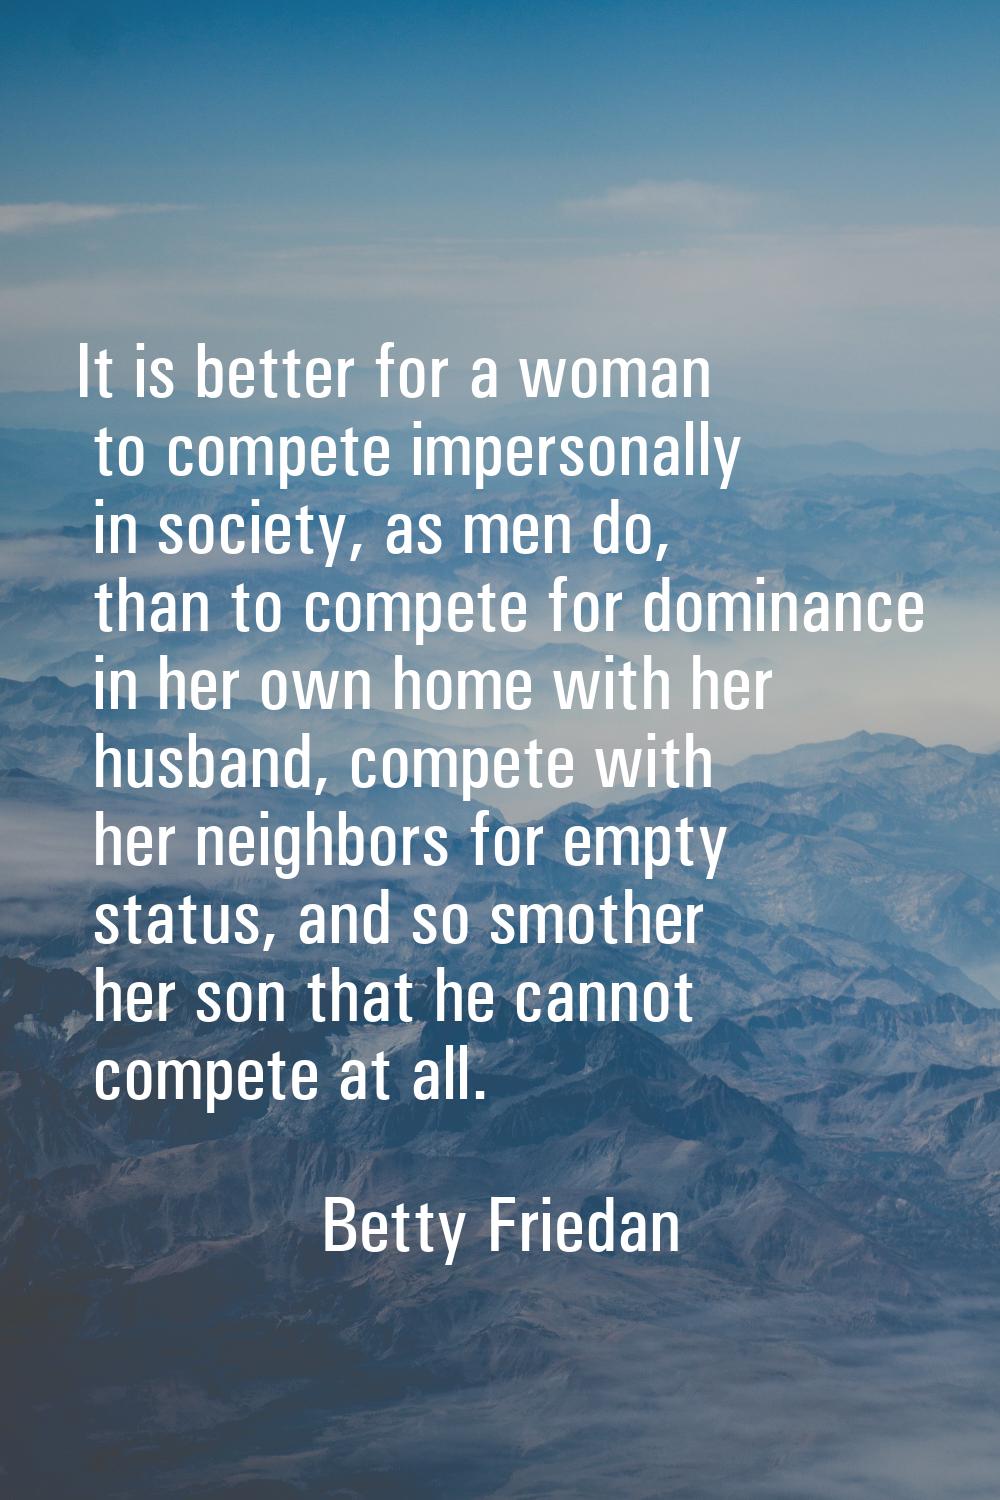 It is better for a woman to compete impersonally in society, as men do, than to compete for dominan